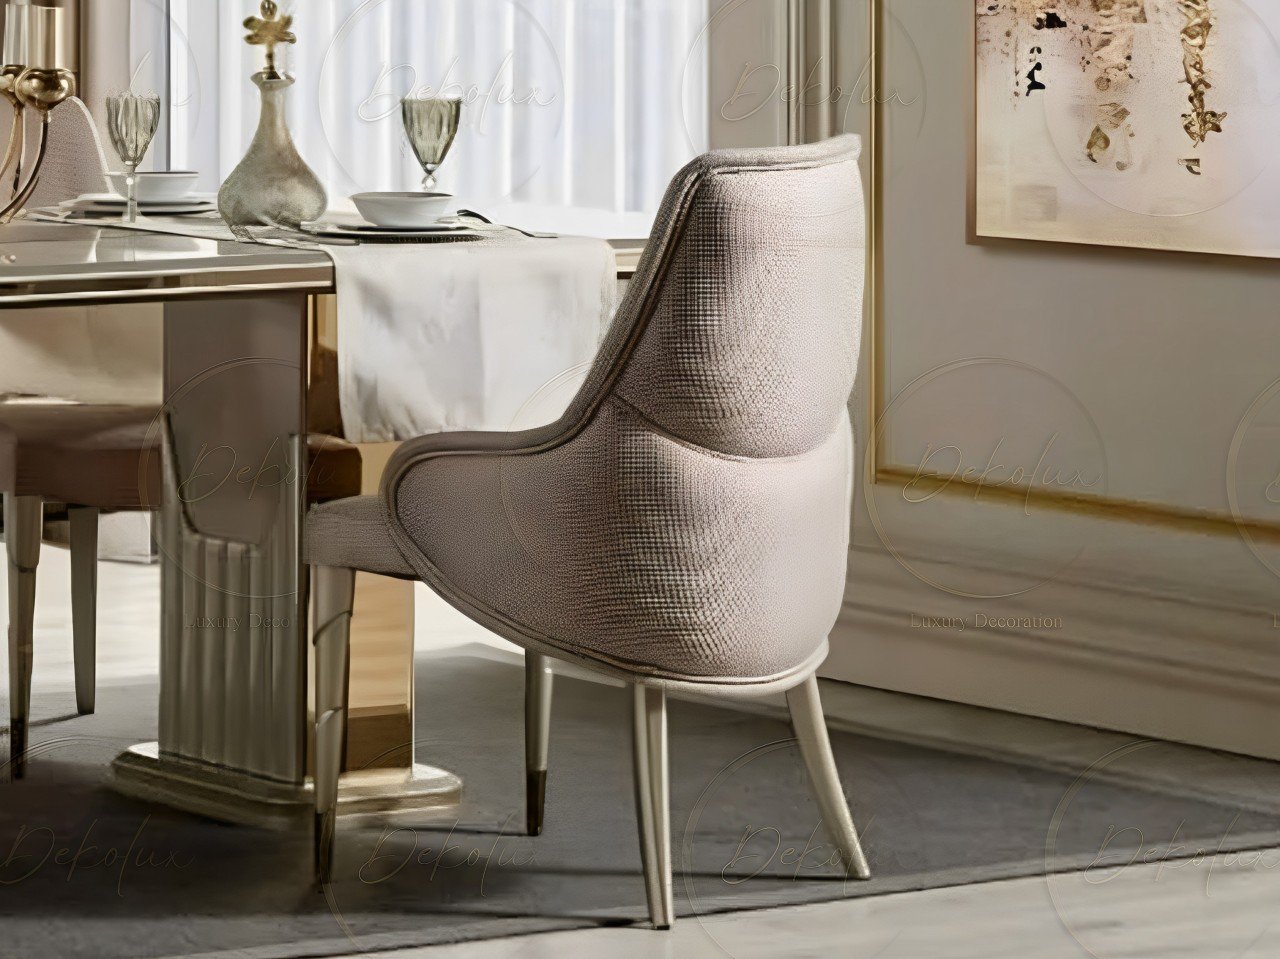 Dining chair collection